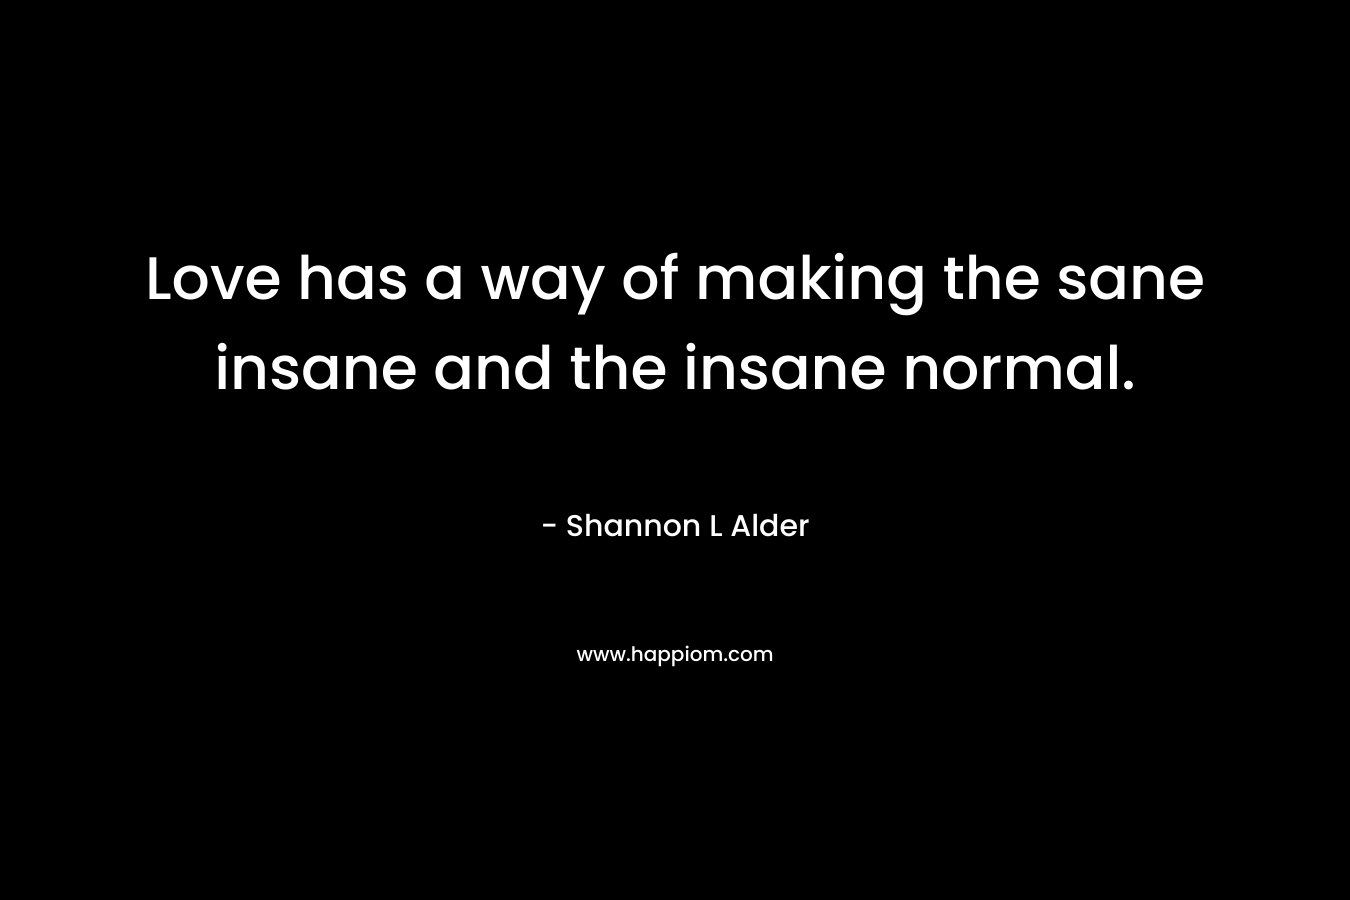 Love has a way of making the sane insane and the insane normal. – Shannon L Alder